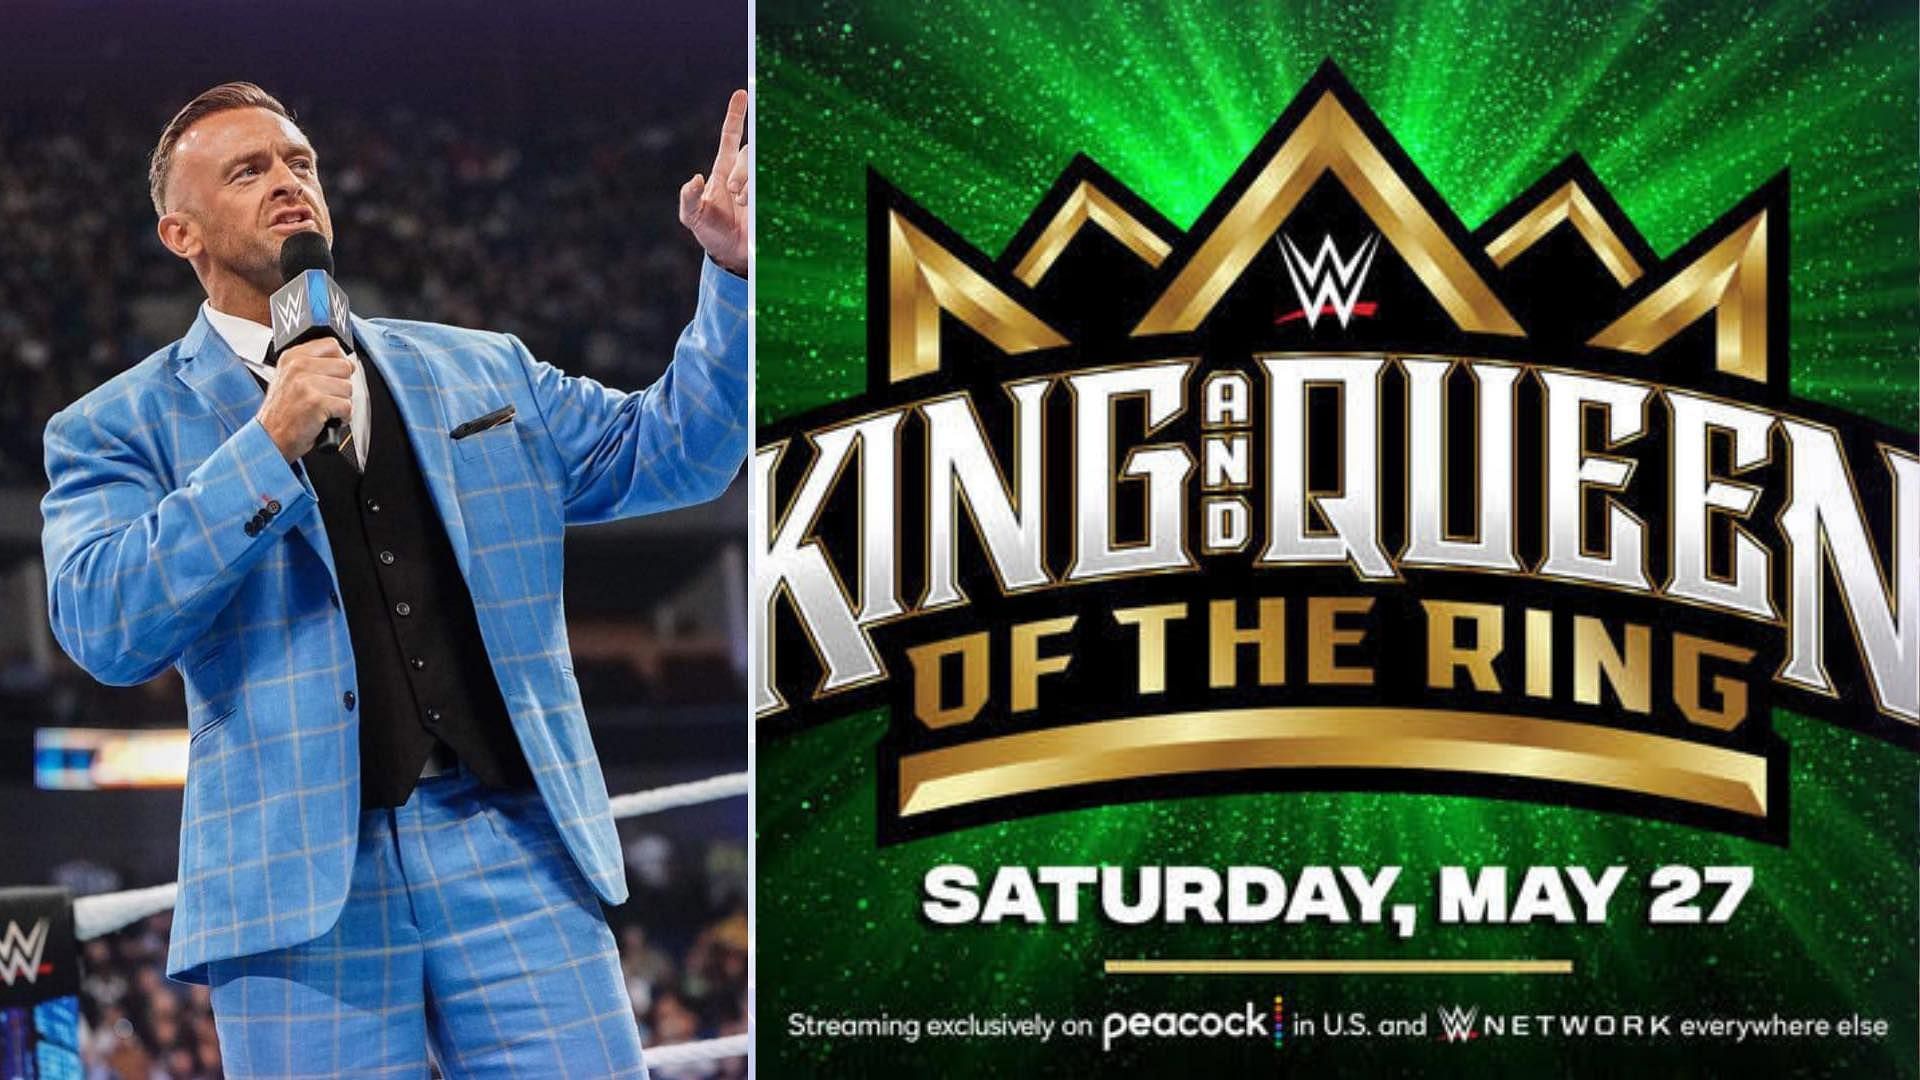 Several WWE SmackDown stars will compete in the King of the Ring tournament